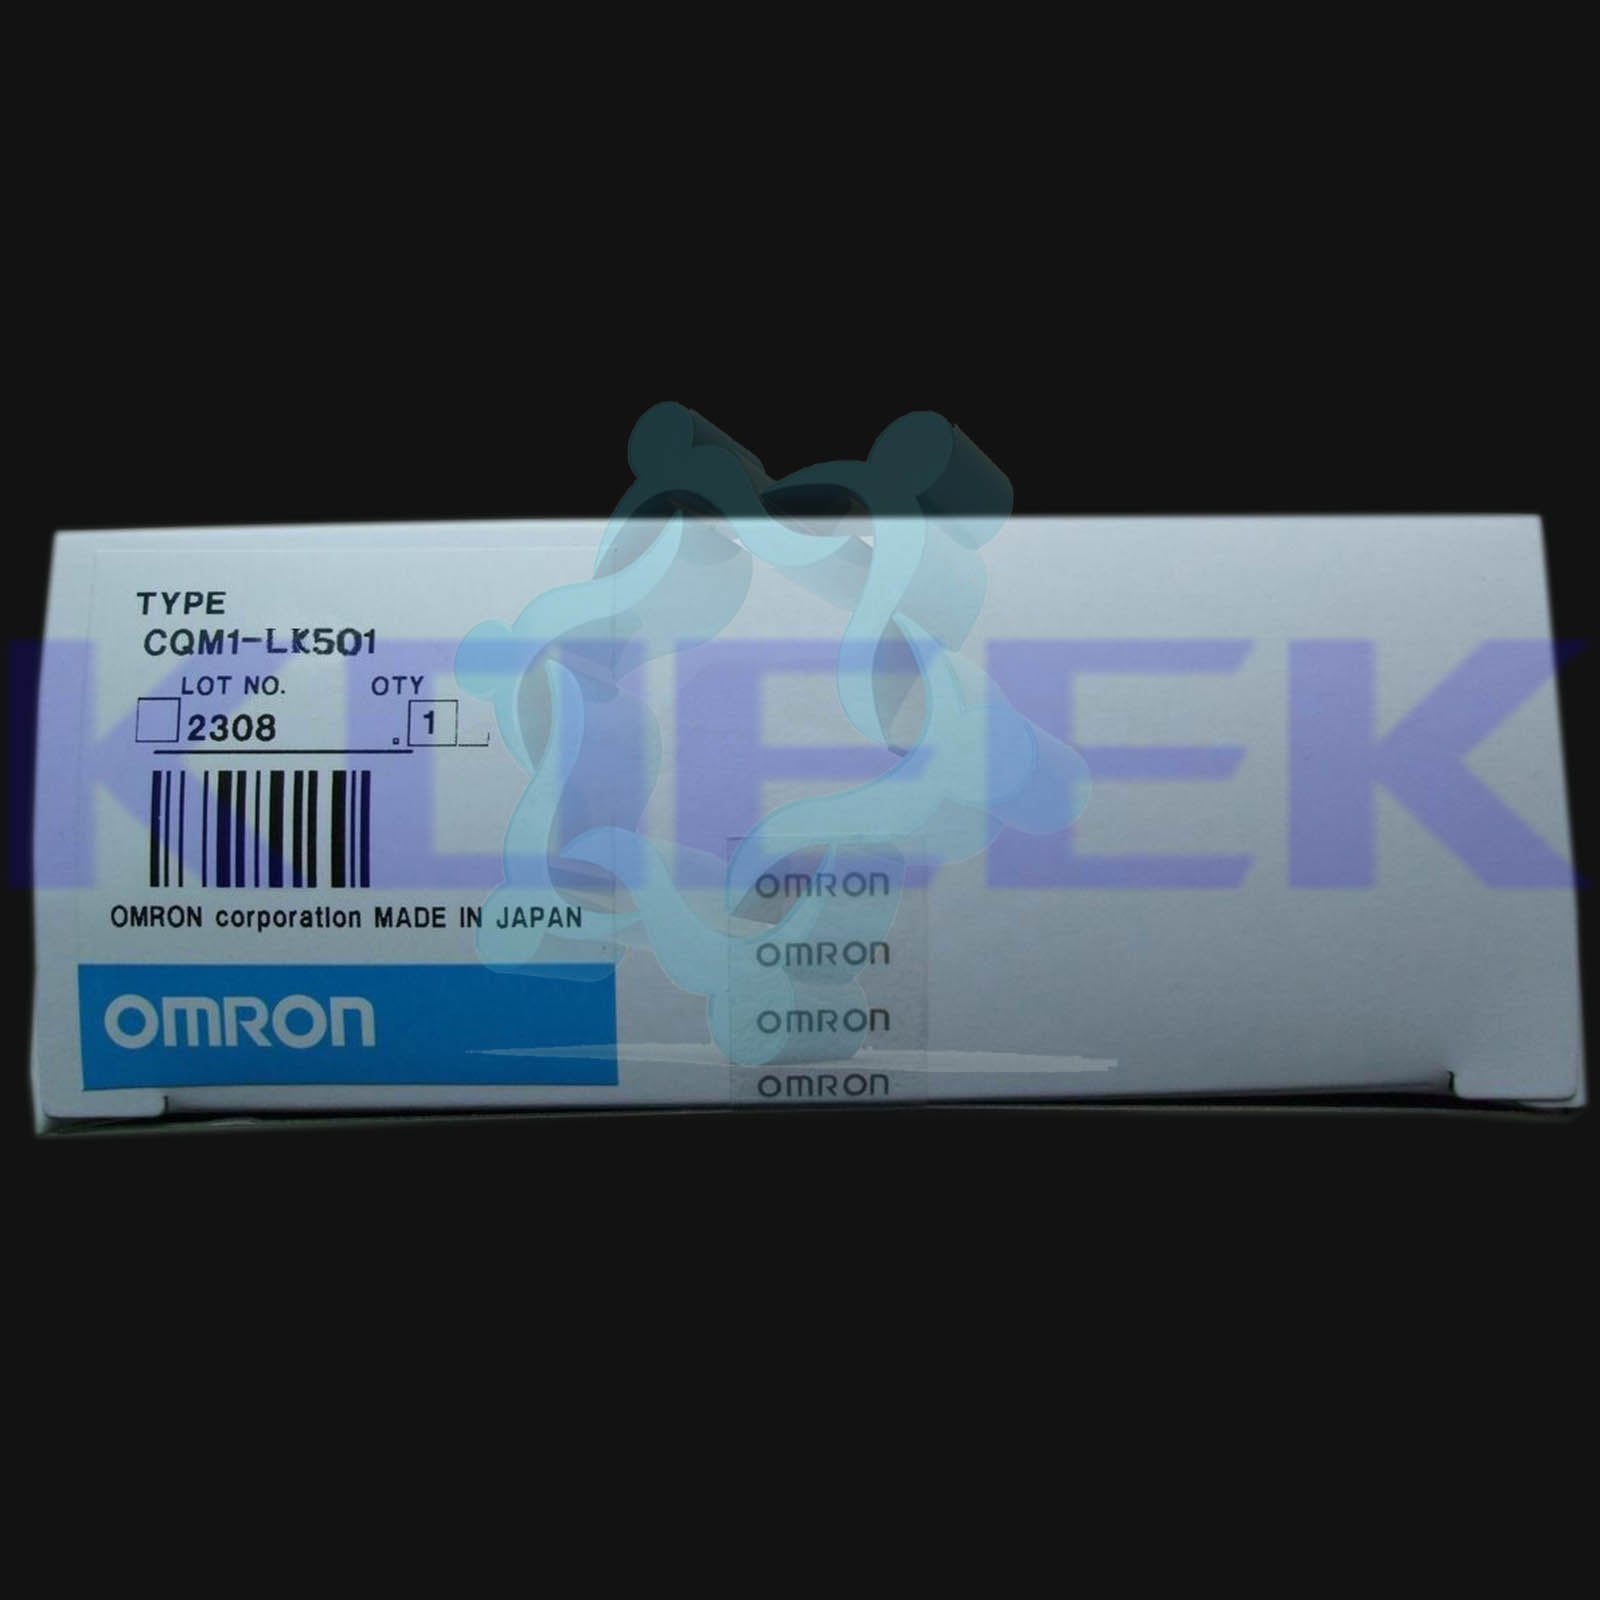 CQM1-LK501 KOEED 201-500, 90%, import_2020_10_10_031751, Omron, Other